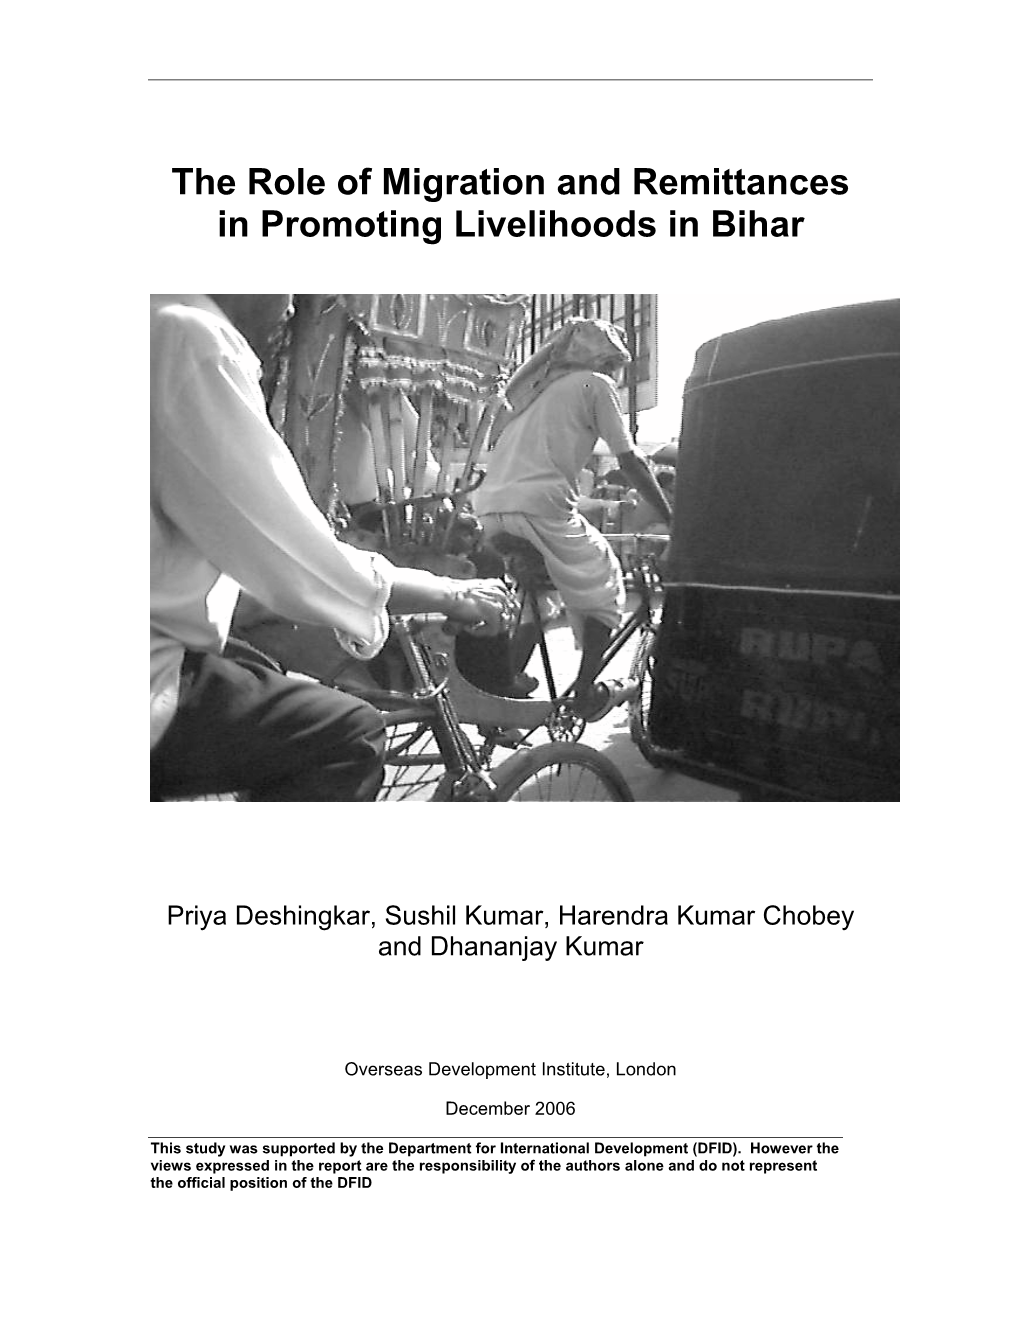 The Role of Migration and Remittances in Promoting Livelihoods in Bihar